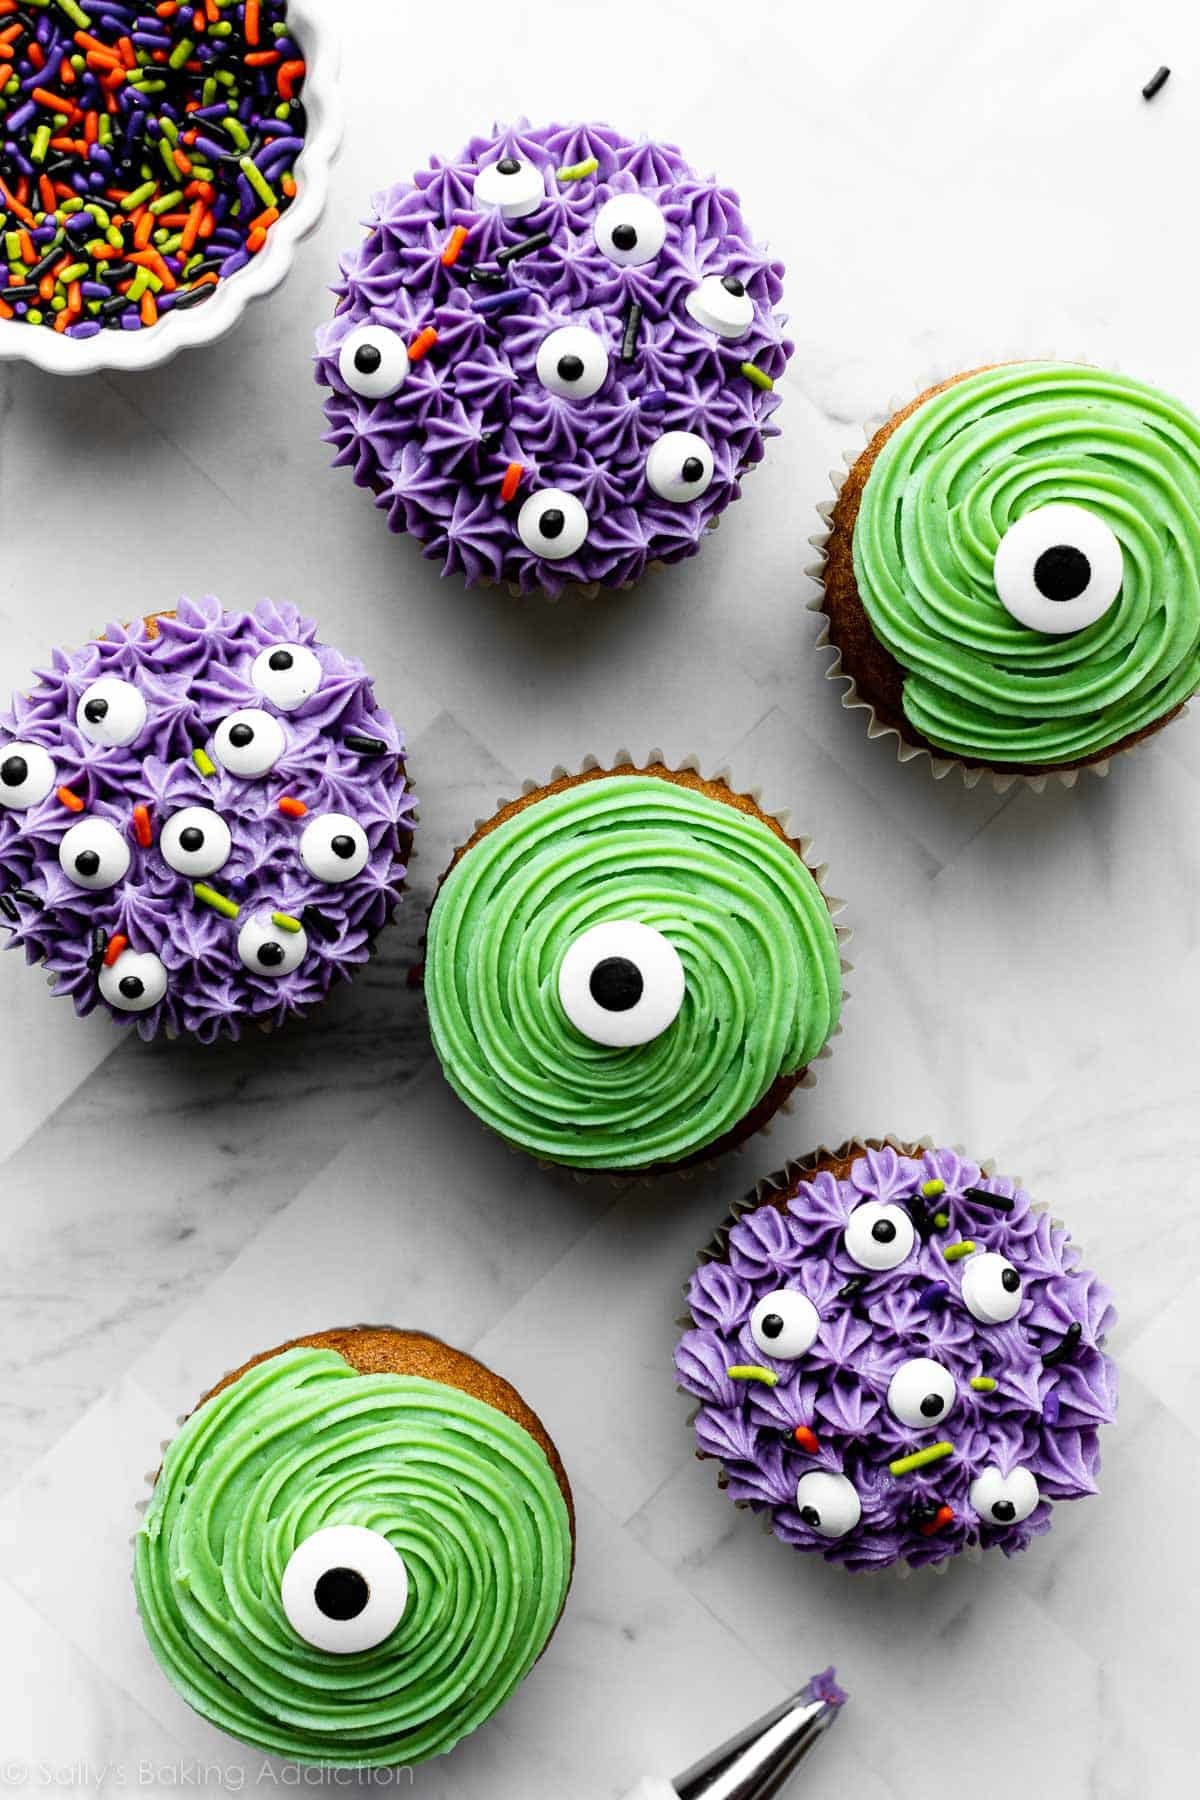 cupcakes decorated as monsters with green frosting and purple frosting, plus candy eyeballs and Halloween sprinkles.